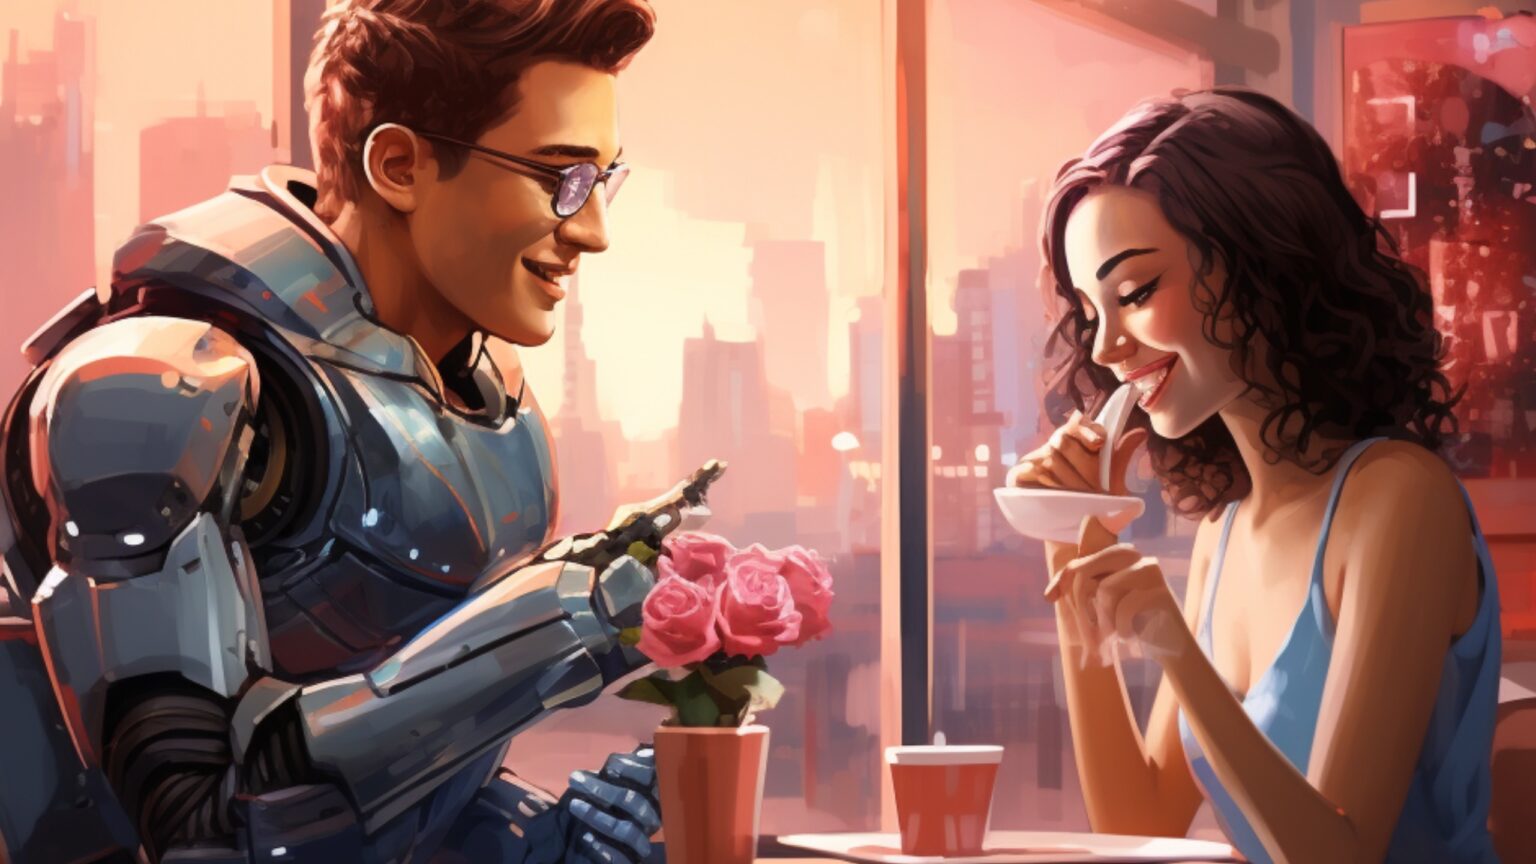 Chatbot Wants to Beat Loneliness with Digital Romance